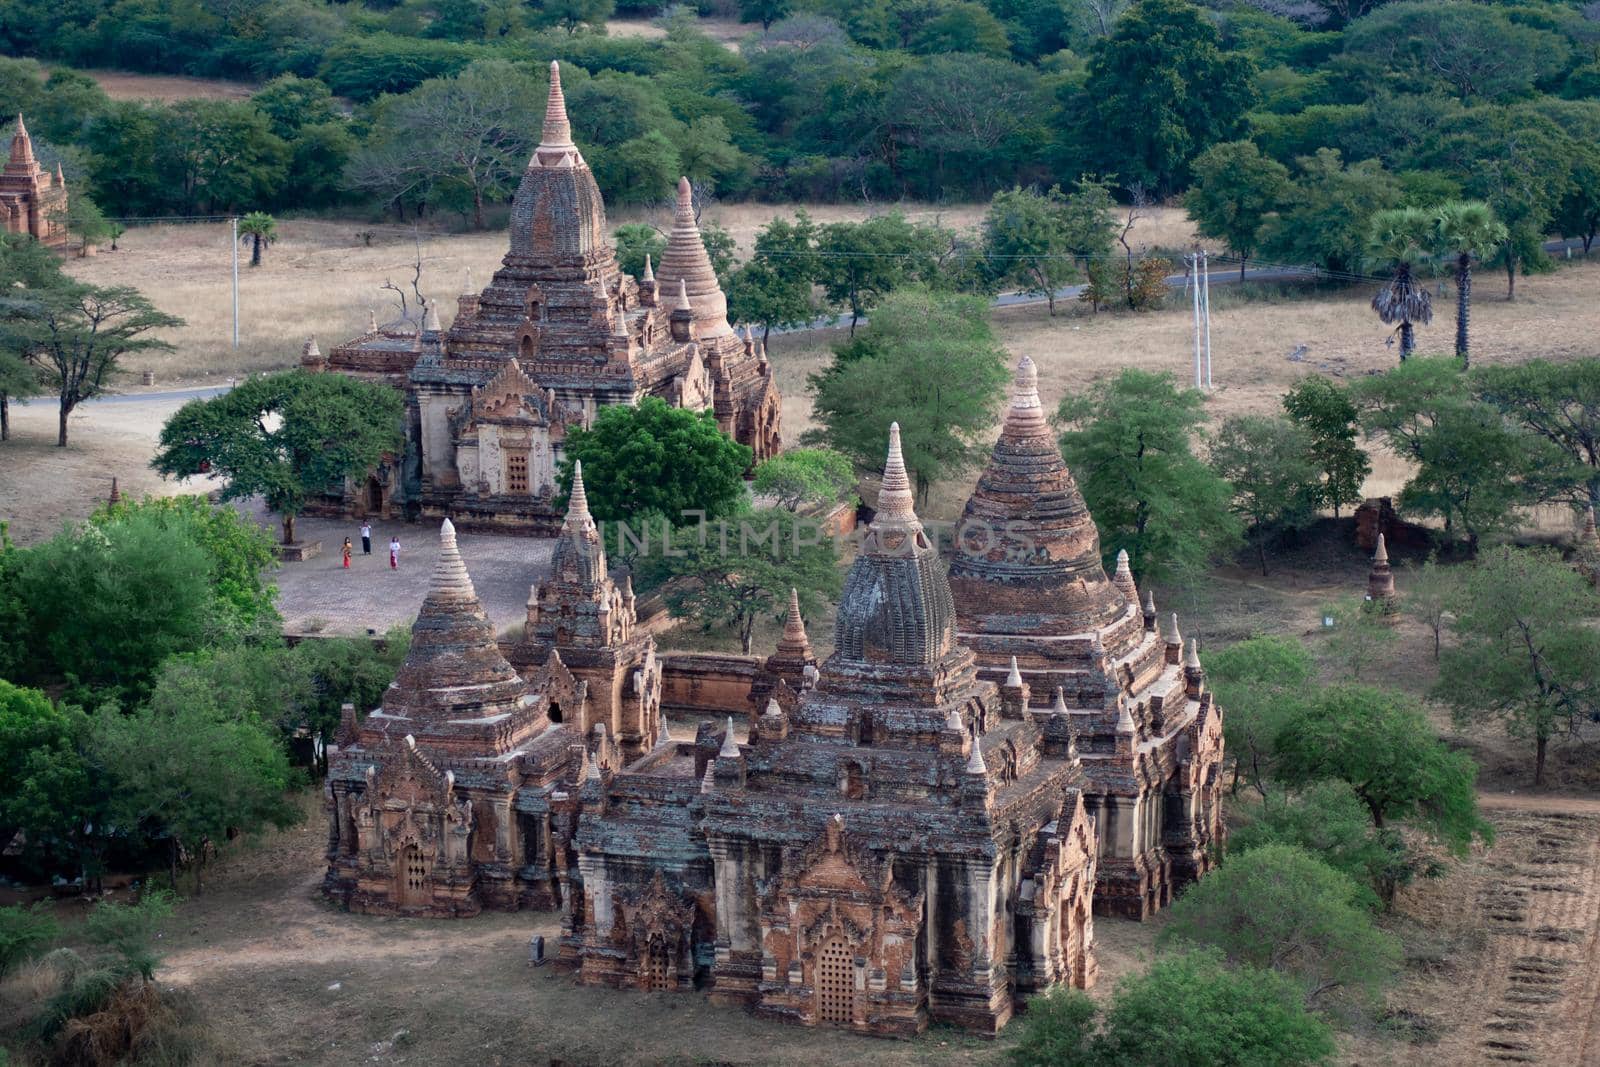 A few historical temples from the Nan Myint viewing tower in Bagan by arvidnorberg